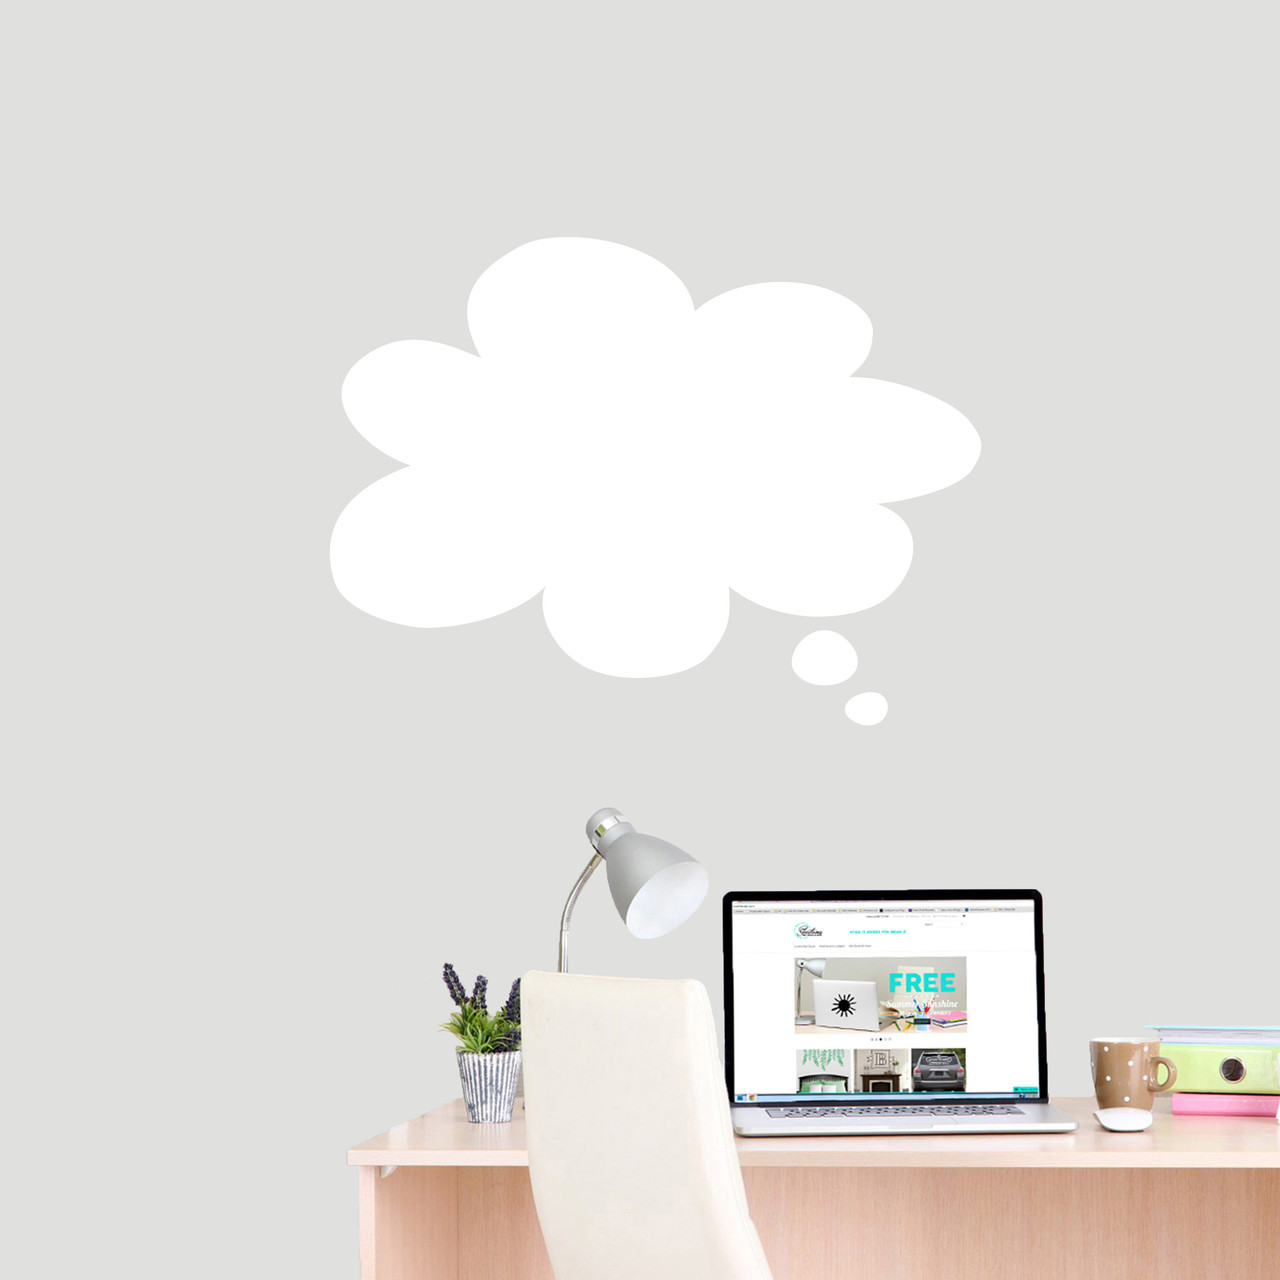 Dry Erase Thought Bubble Wall Decal